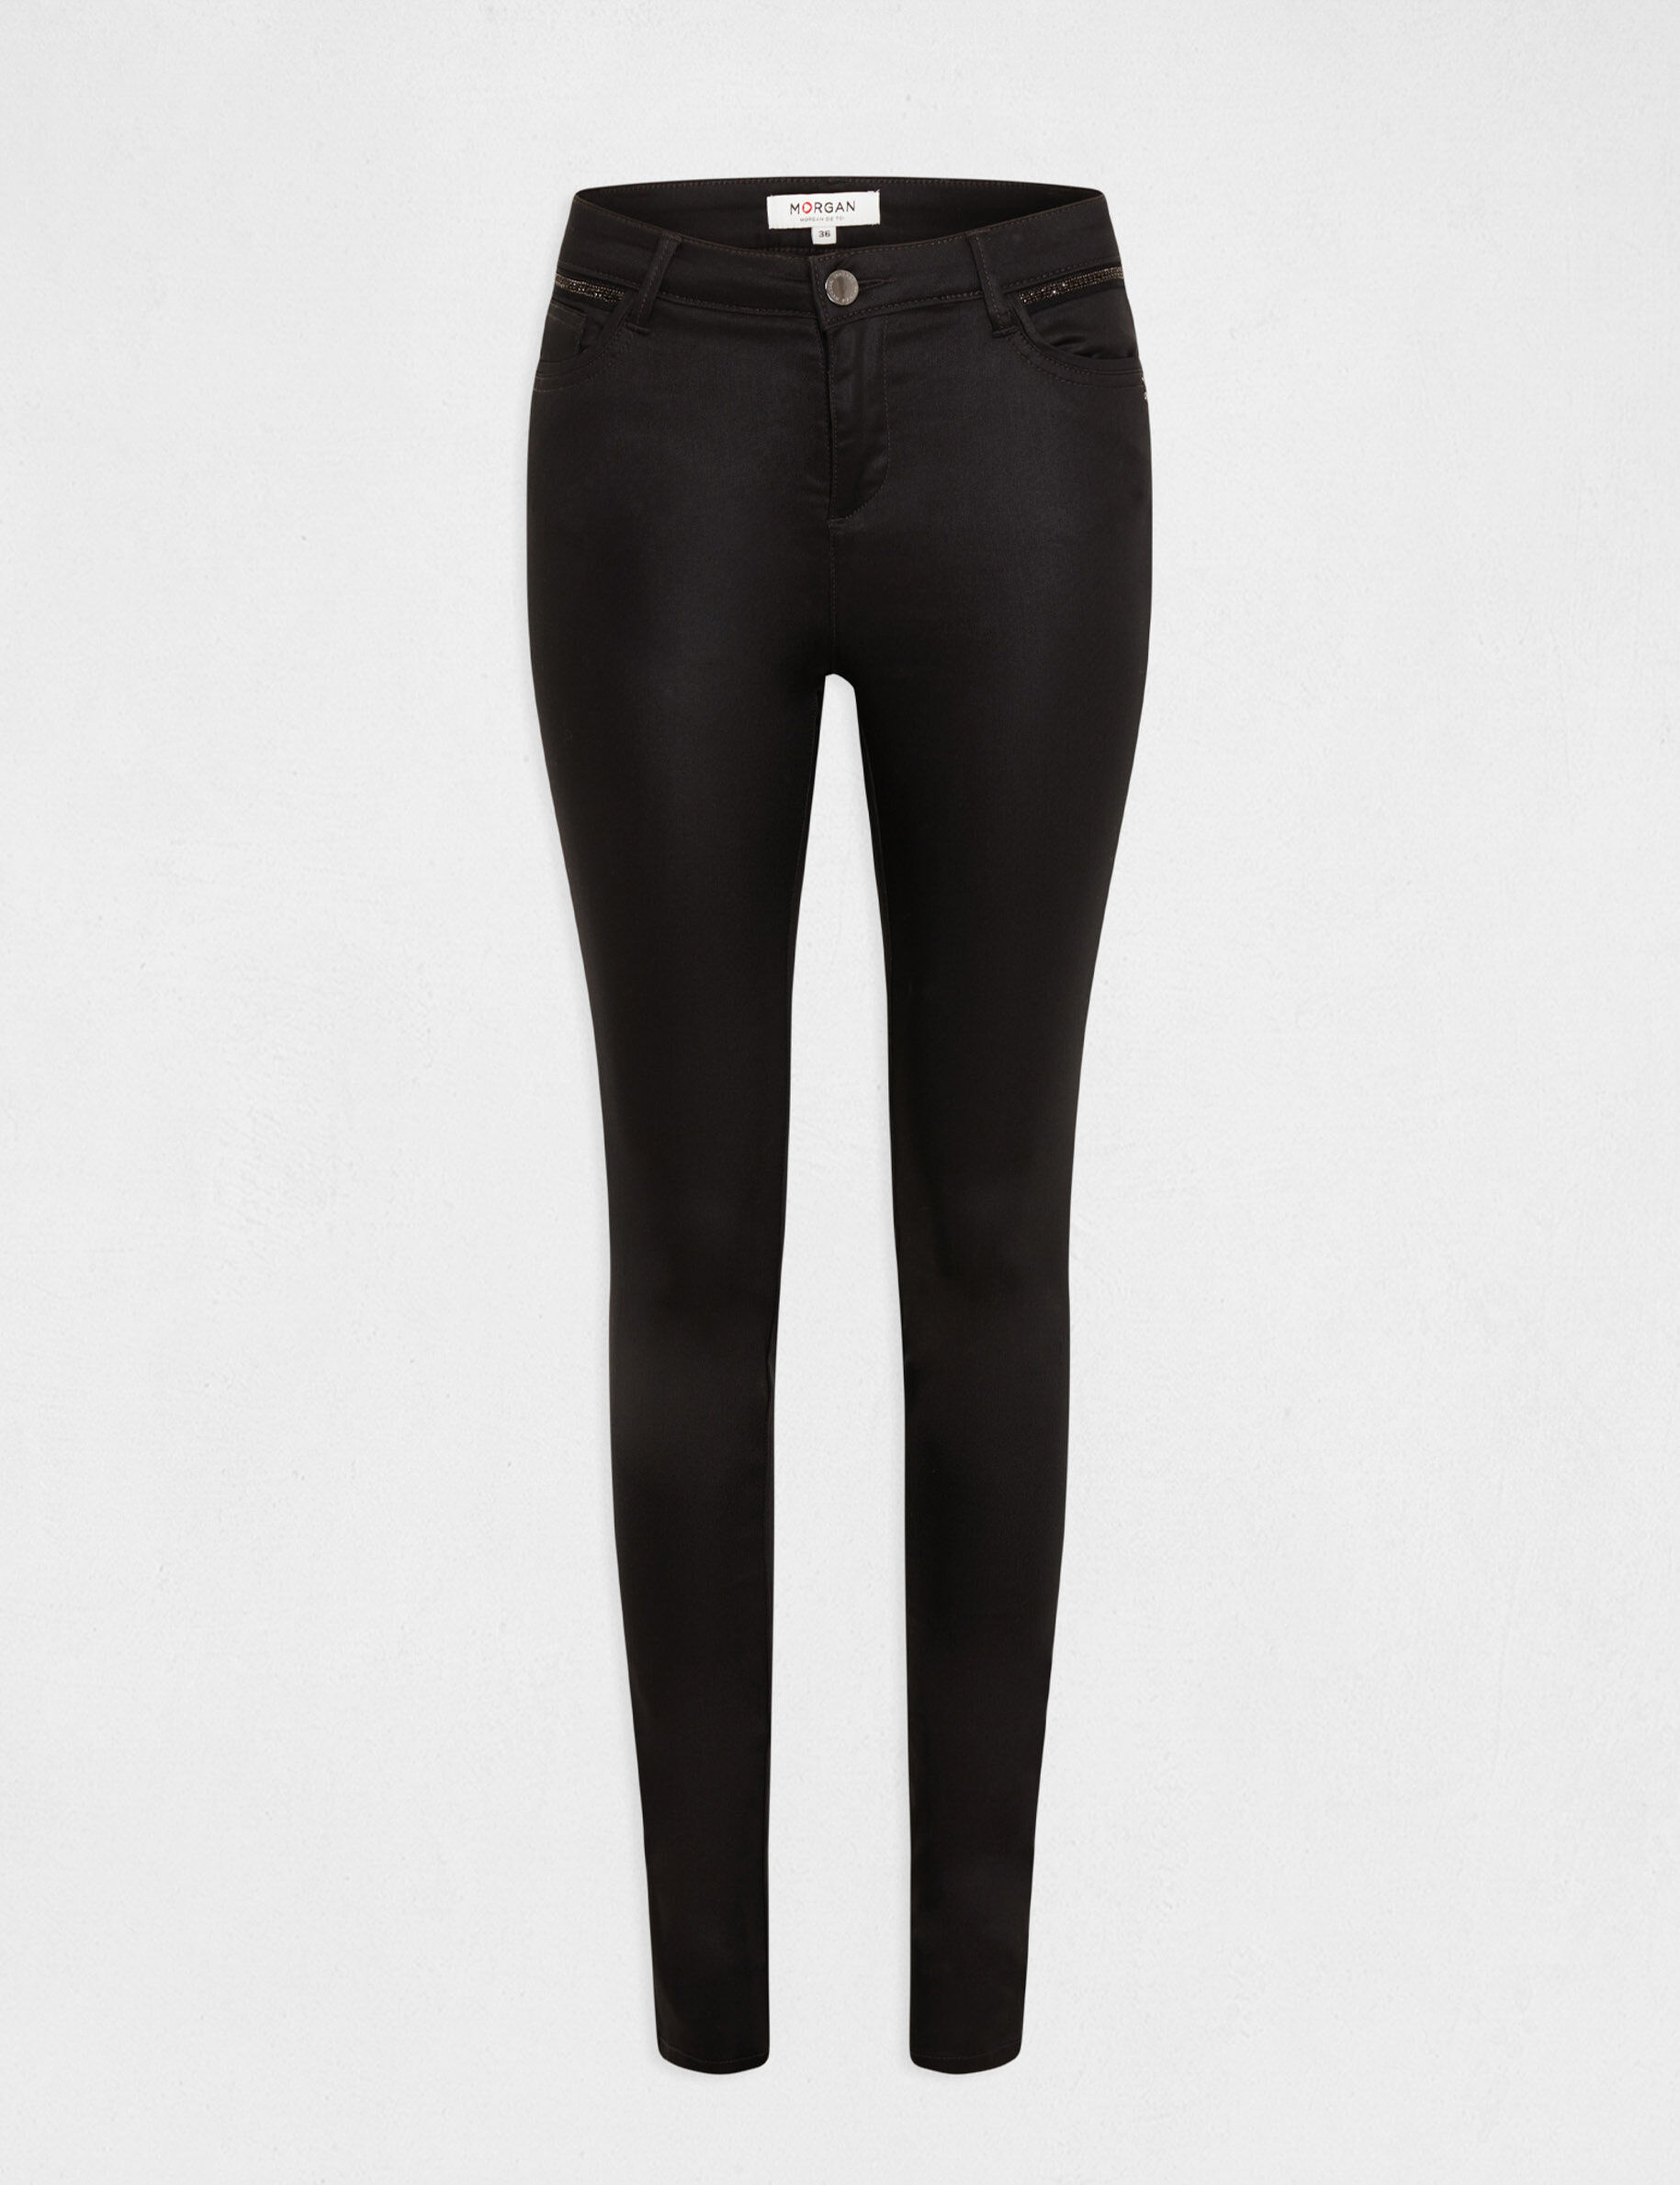 Buy Black Jersey Stretch Skinny Trousers (3-18yrs) from Next USA